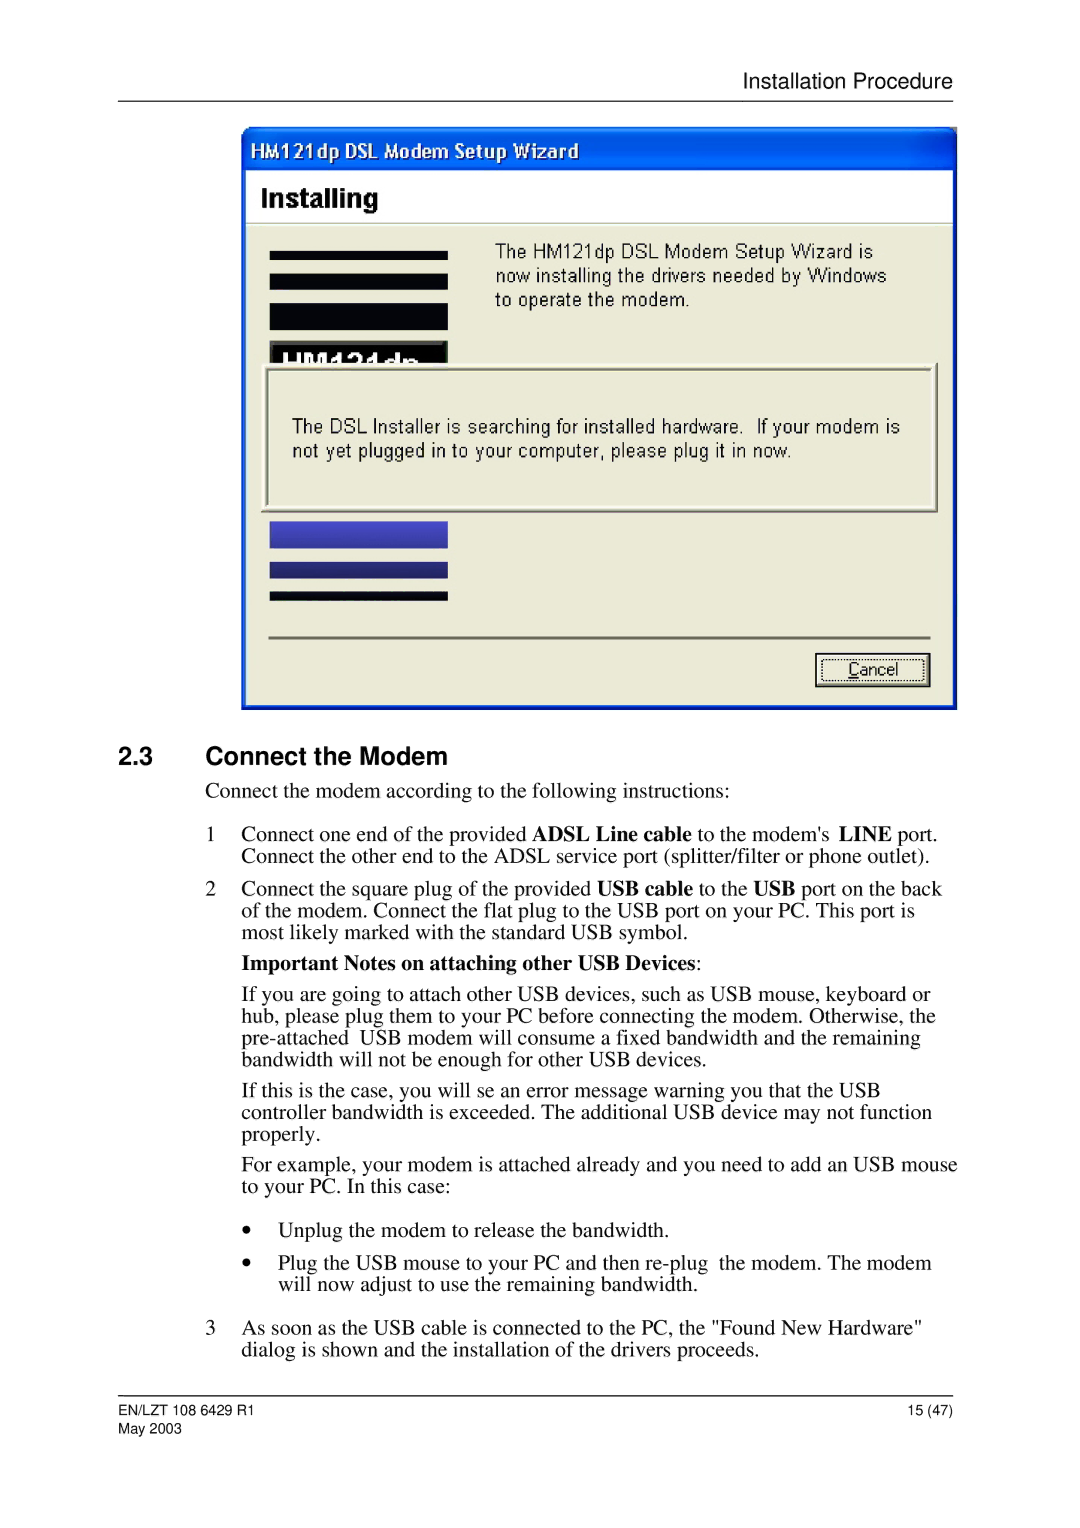 Ericsson HM121dp, HM121di manual Connect the Modem, Important Notes on attaching other USB Devices 